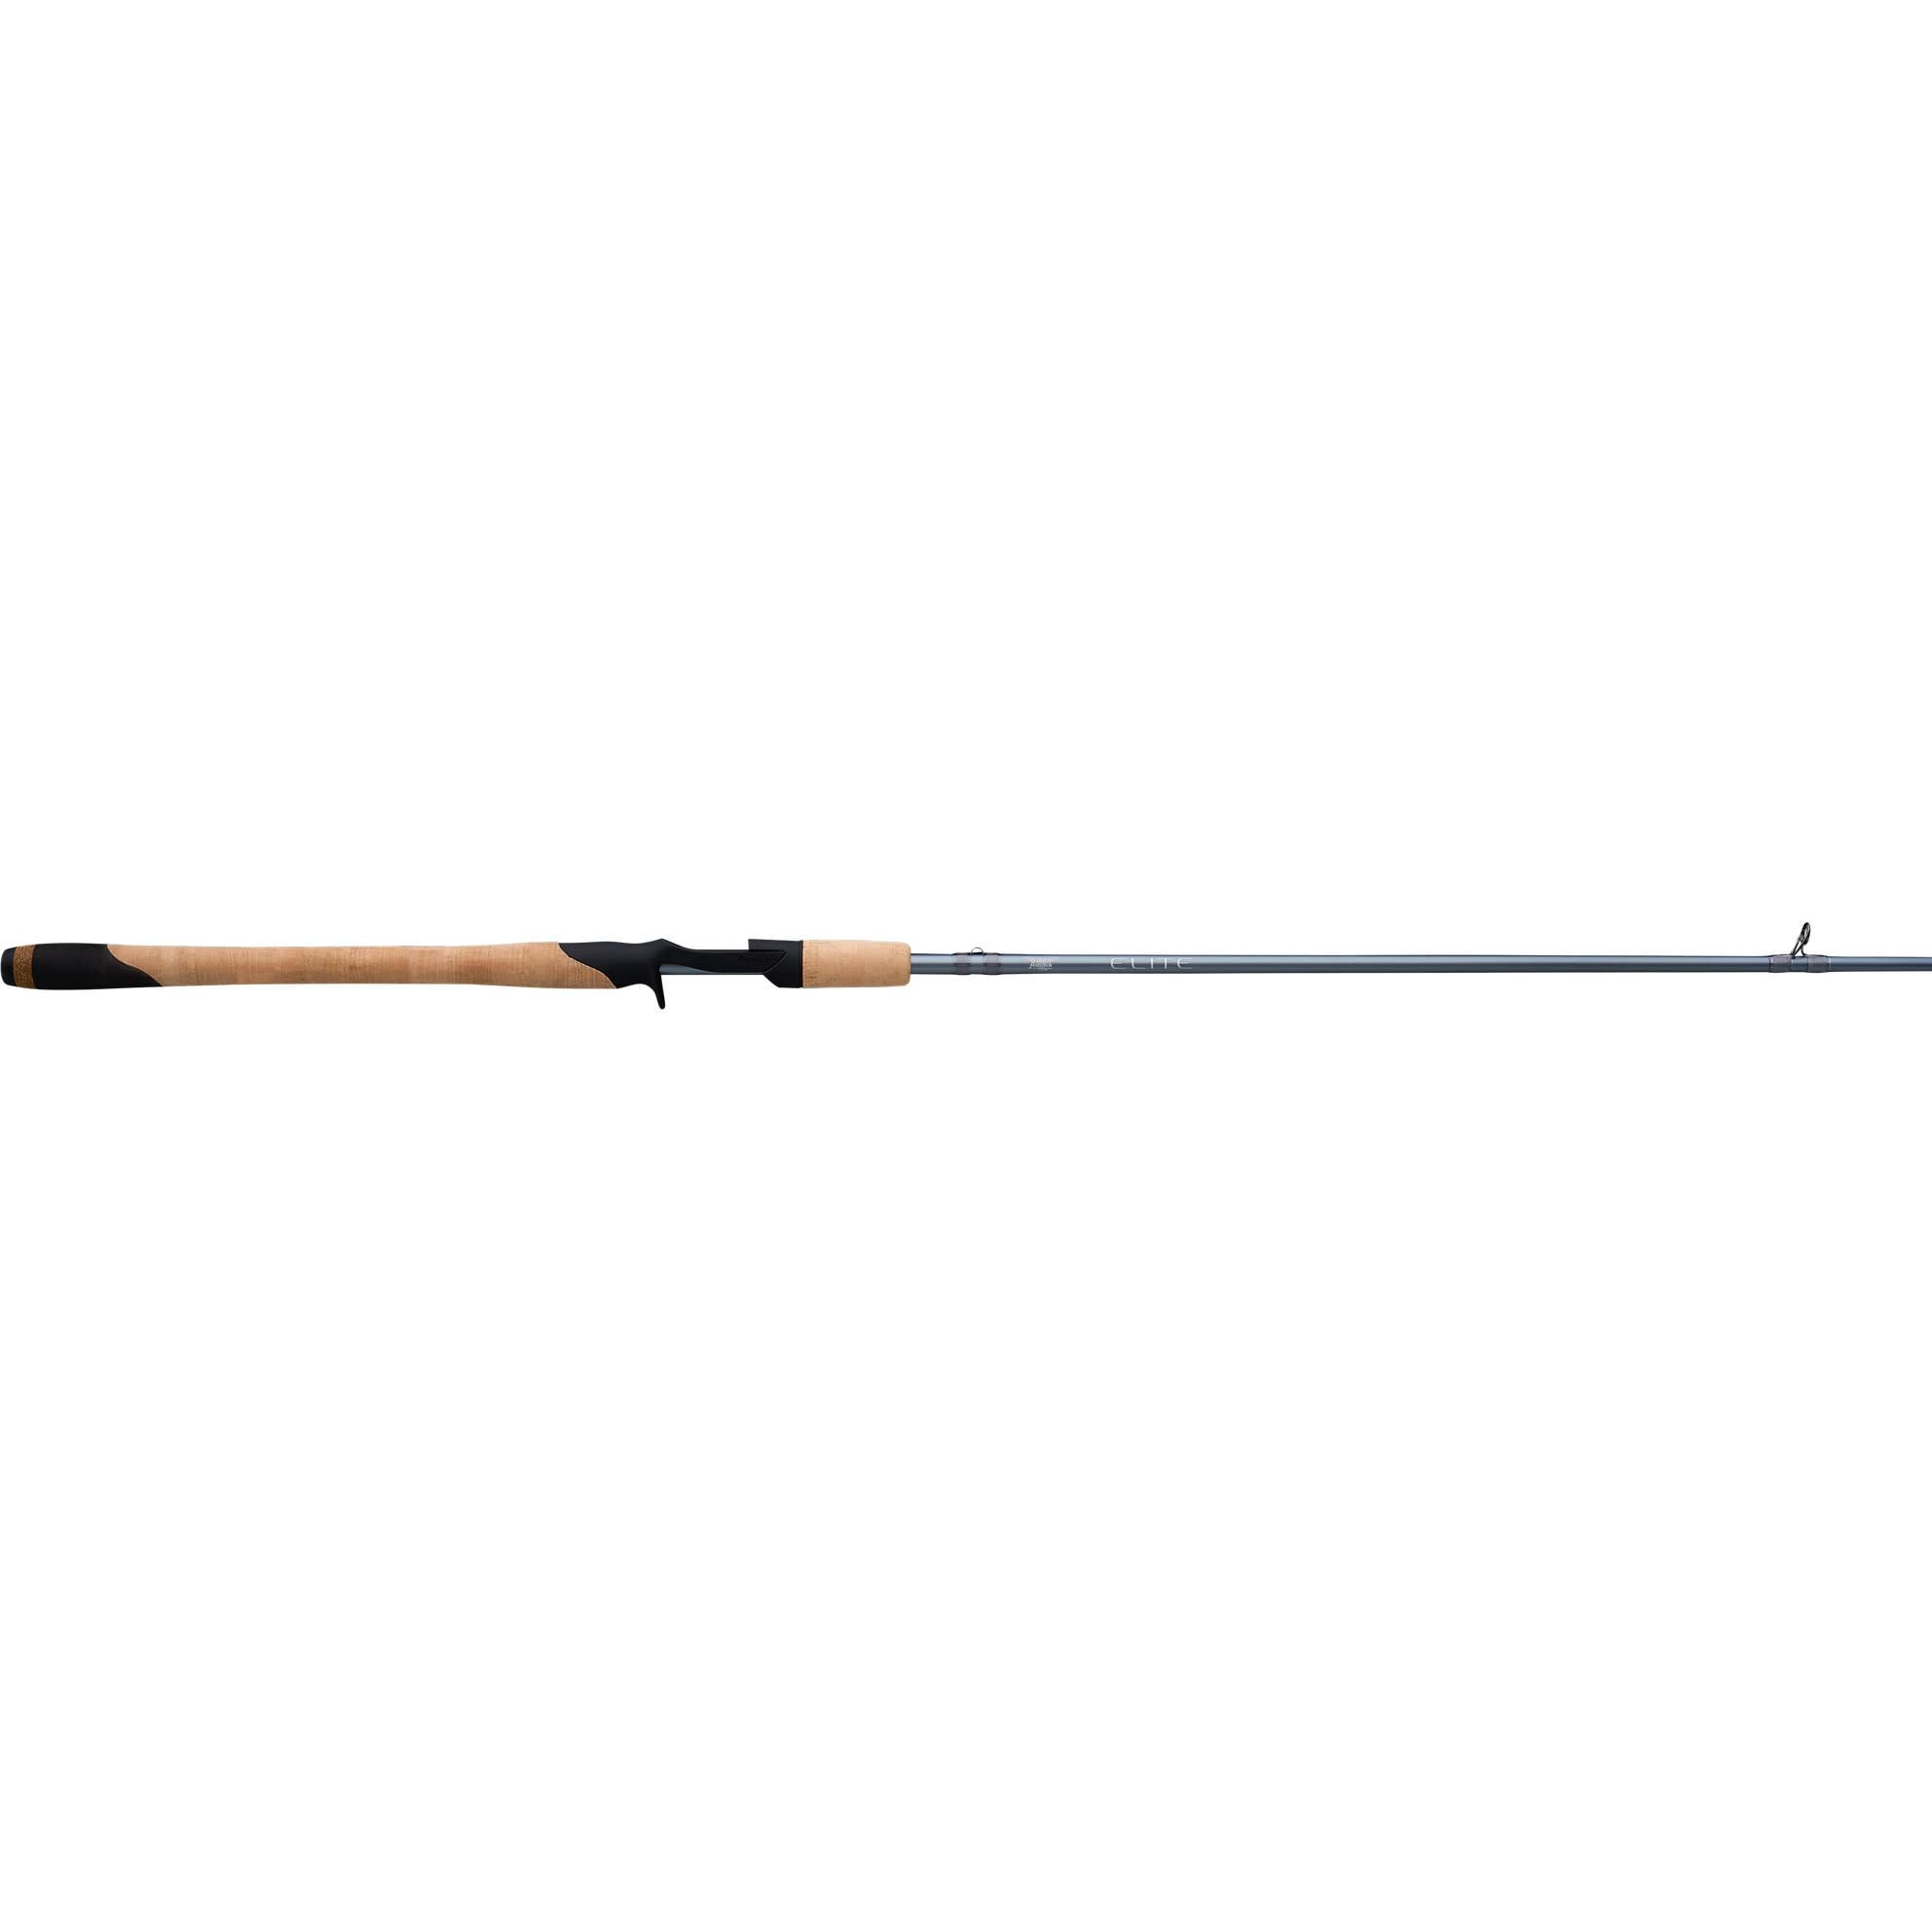 PENN PREVAIL III SPINNING BOAT RODS